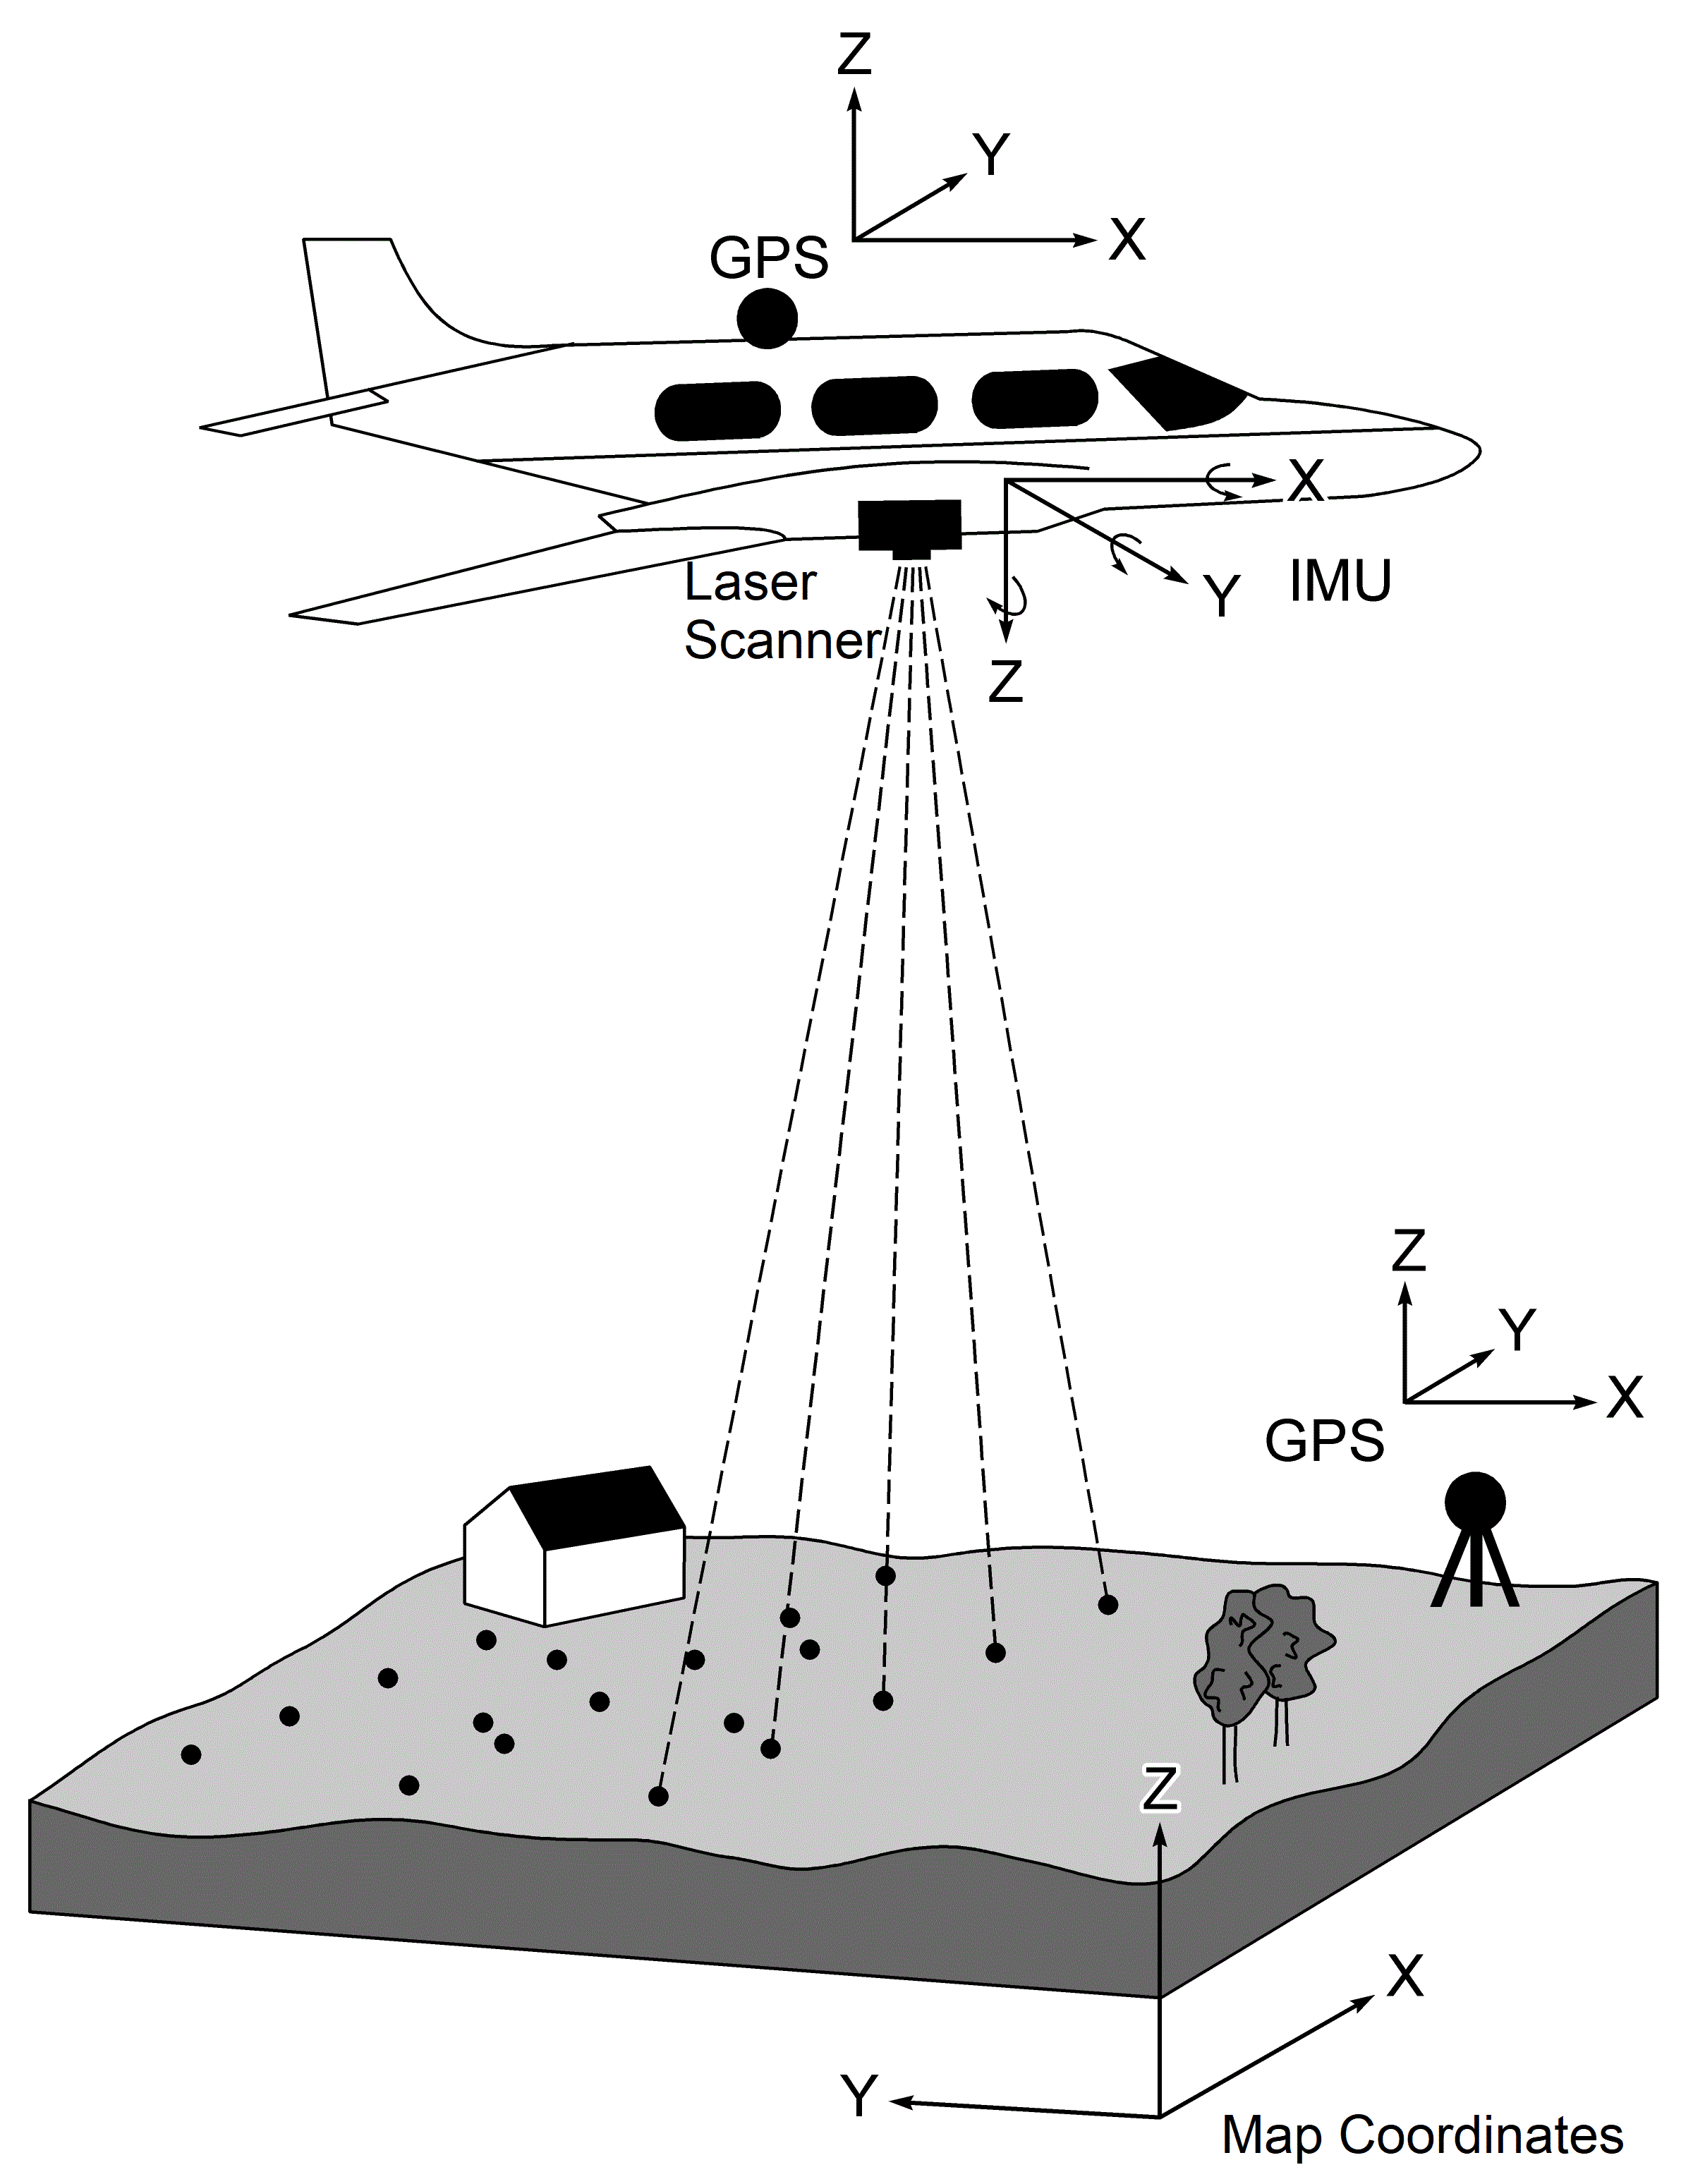 Overview of the components of a LiDAR System. As is common for large scale data acquisition, the laser scanning is placed on board an aircarft and scans the Earth below it. The aircraft has on on board GPS/GNSS, as well as an intertial measurement unit (IMU). A GPS base station can be used to post-process data and increase spatial accuracy.('LiDAR-i lend', @marek9134_lidar-i_2012, CC-BY-SA-3.0).